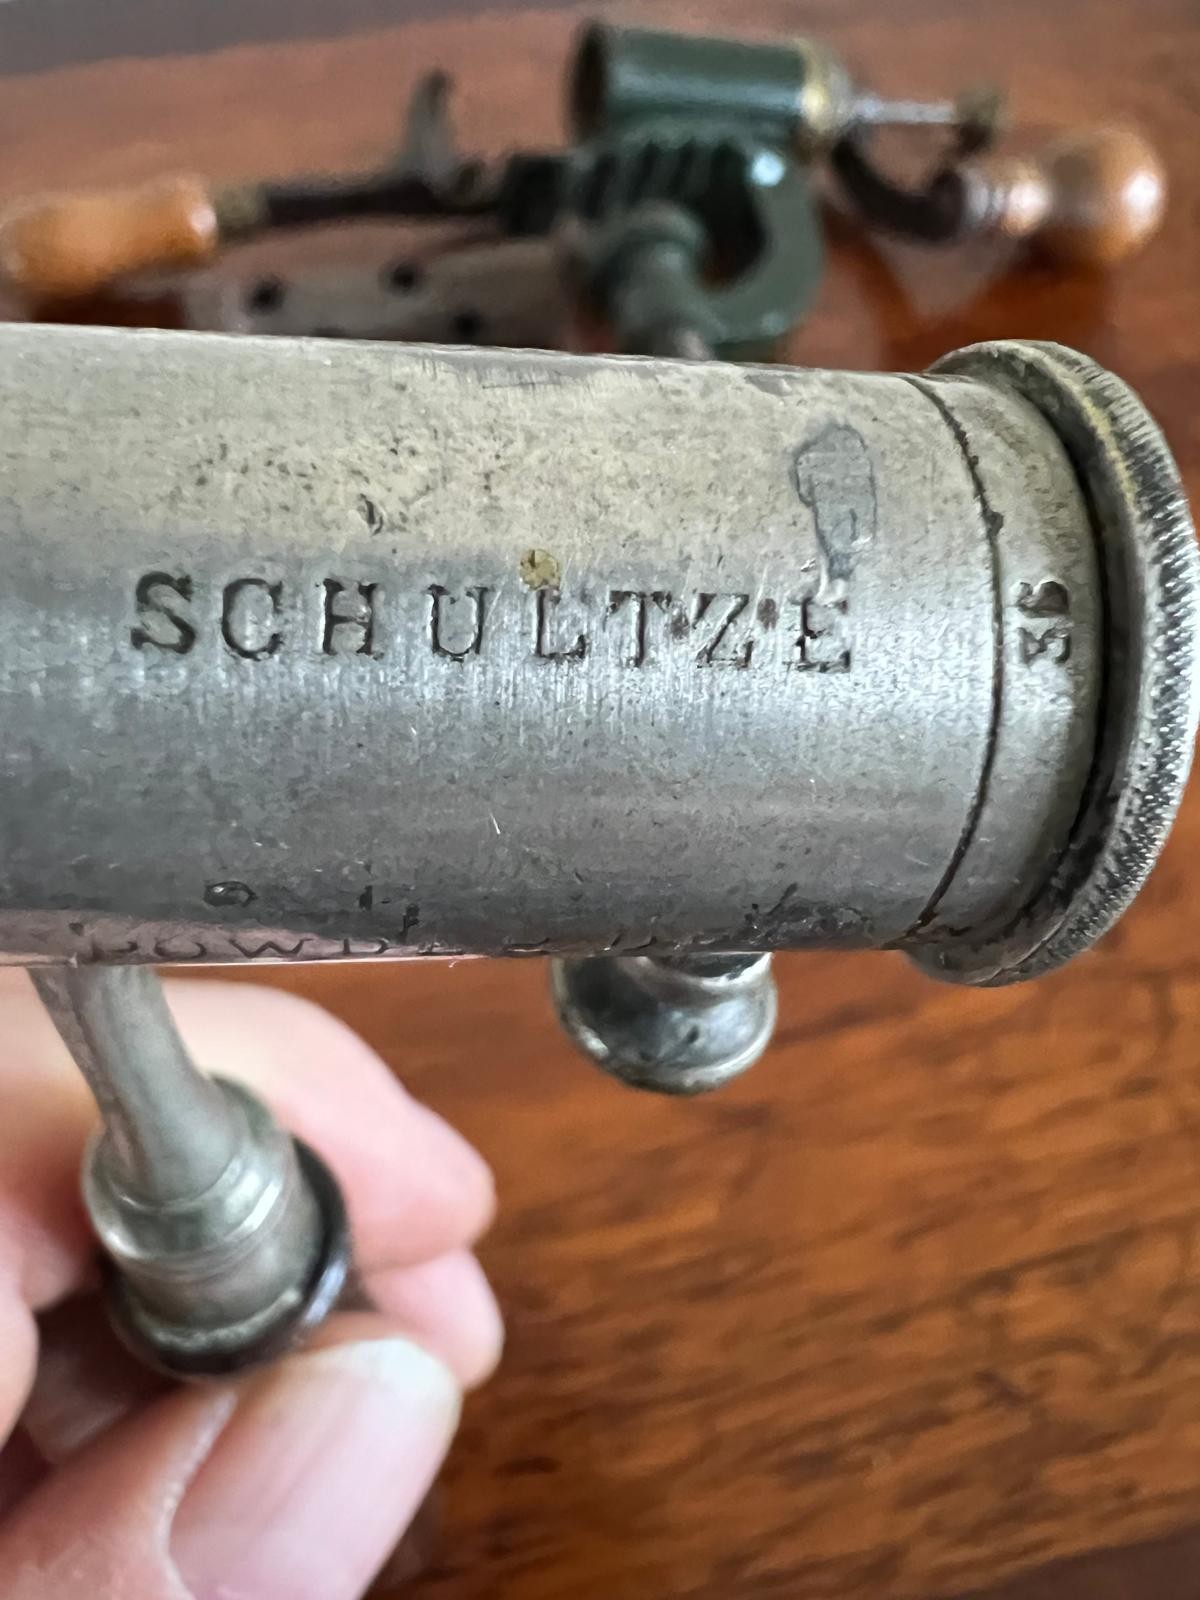 SCHULTZE CARTRIDGE SHOT AND POWDER MEASURE, ALSO A CARTRIDGE RELOADING MACHINE - Image 2 of 6